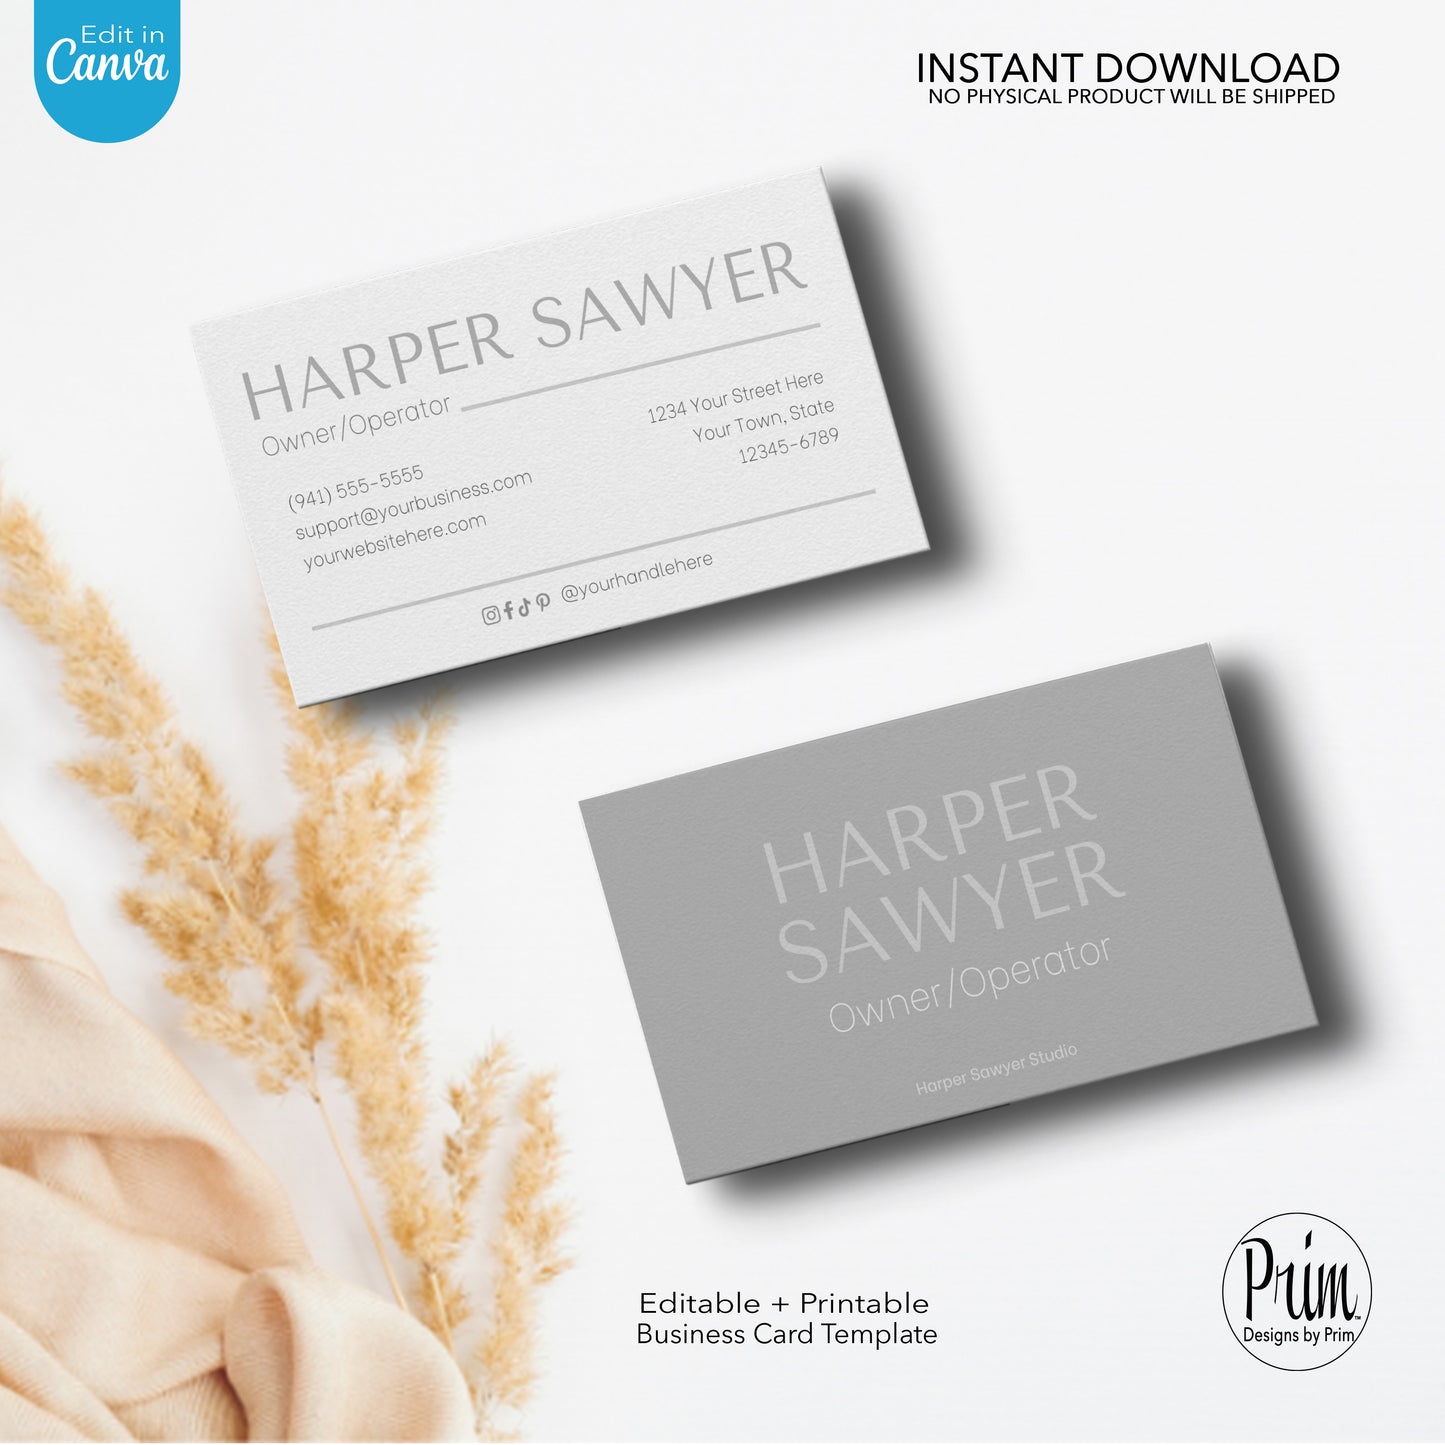 Designs by Prim Simply Modern Business Card | Editable Business Card Taupe Color Landscape | Interior Design Business Card Template | Salon Owner Card | Design Studio Card | Realtor Card Template